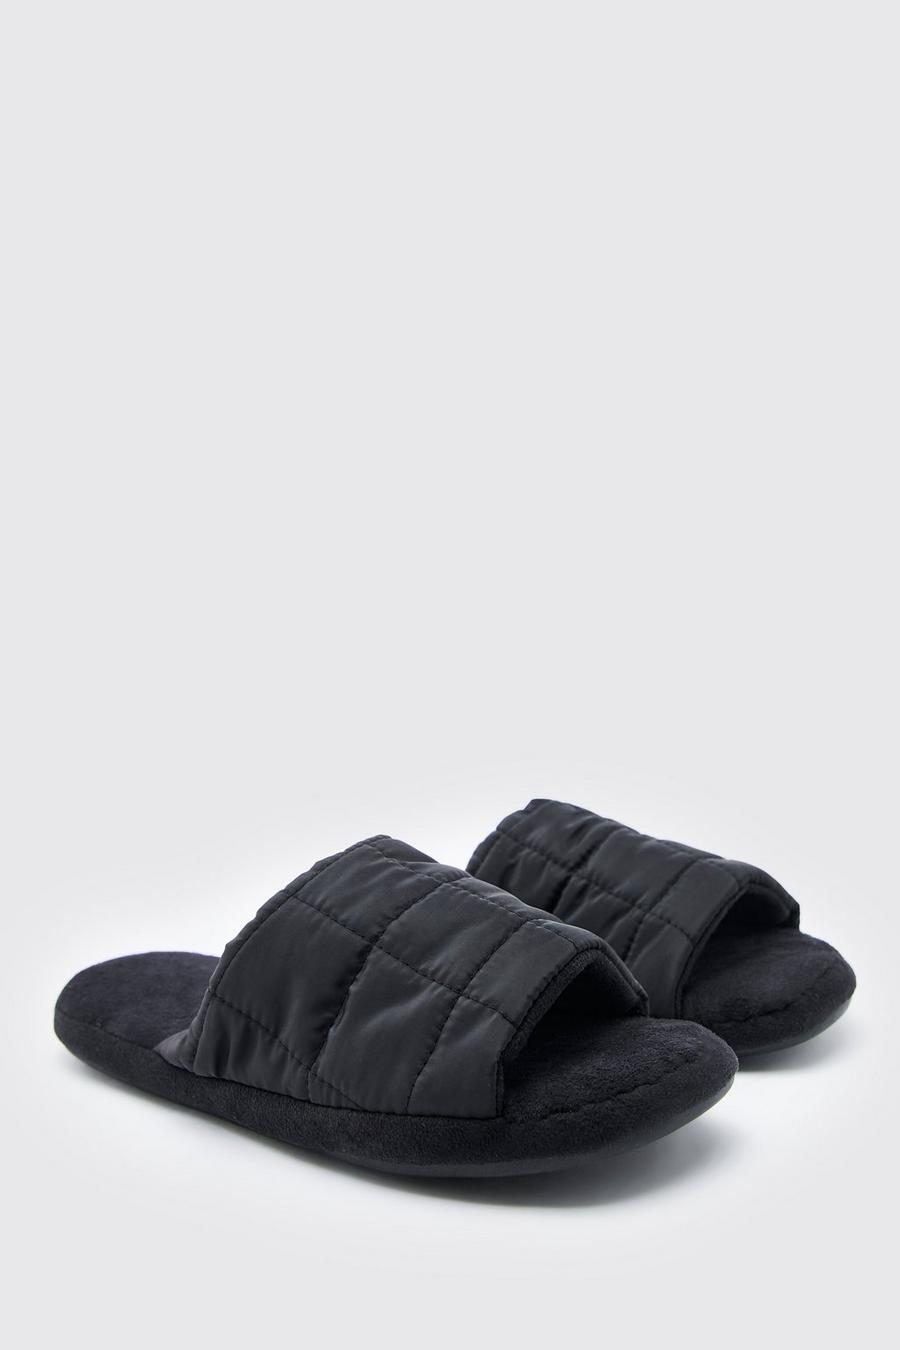 Black Quilted Slipper